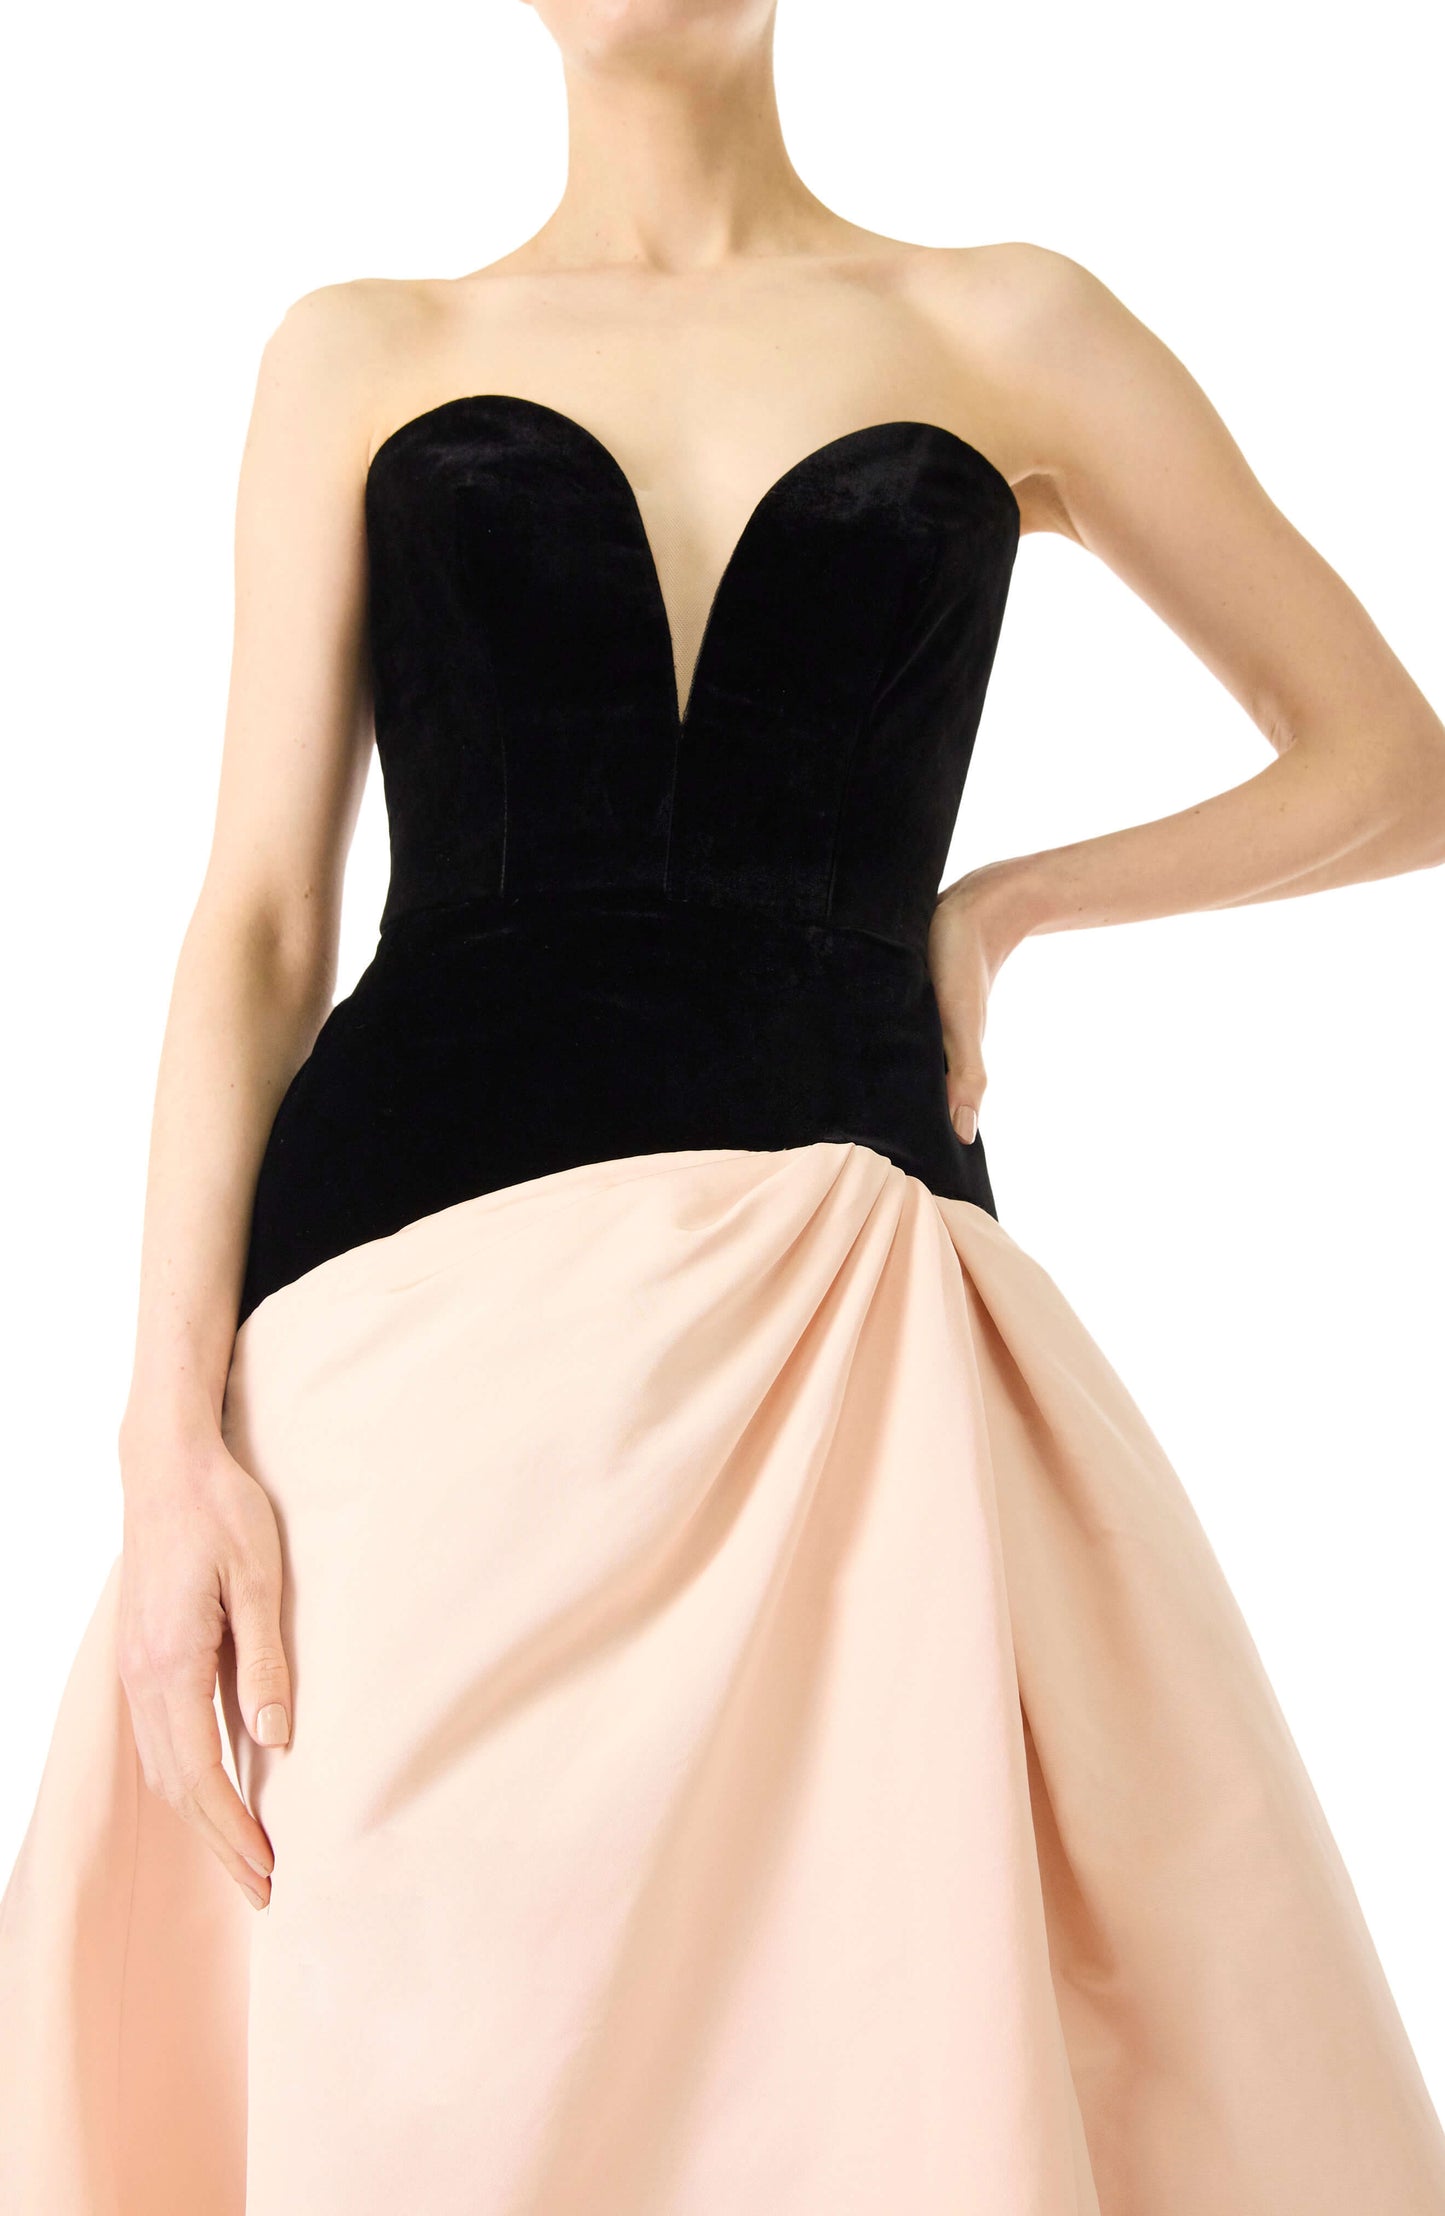 Monique Lhuillier pale blush and noir strapless ballgown with sweetheart neckline, drop waist and high slit in skirt.  